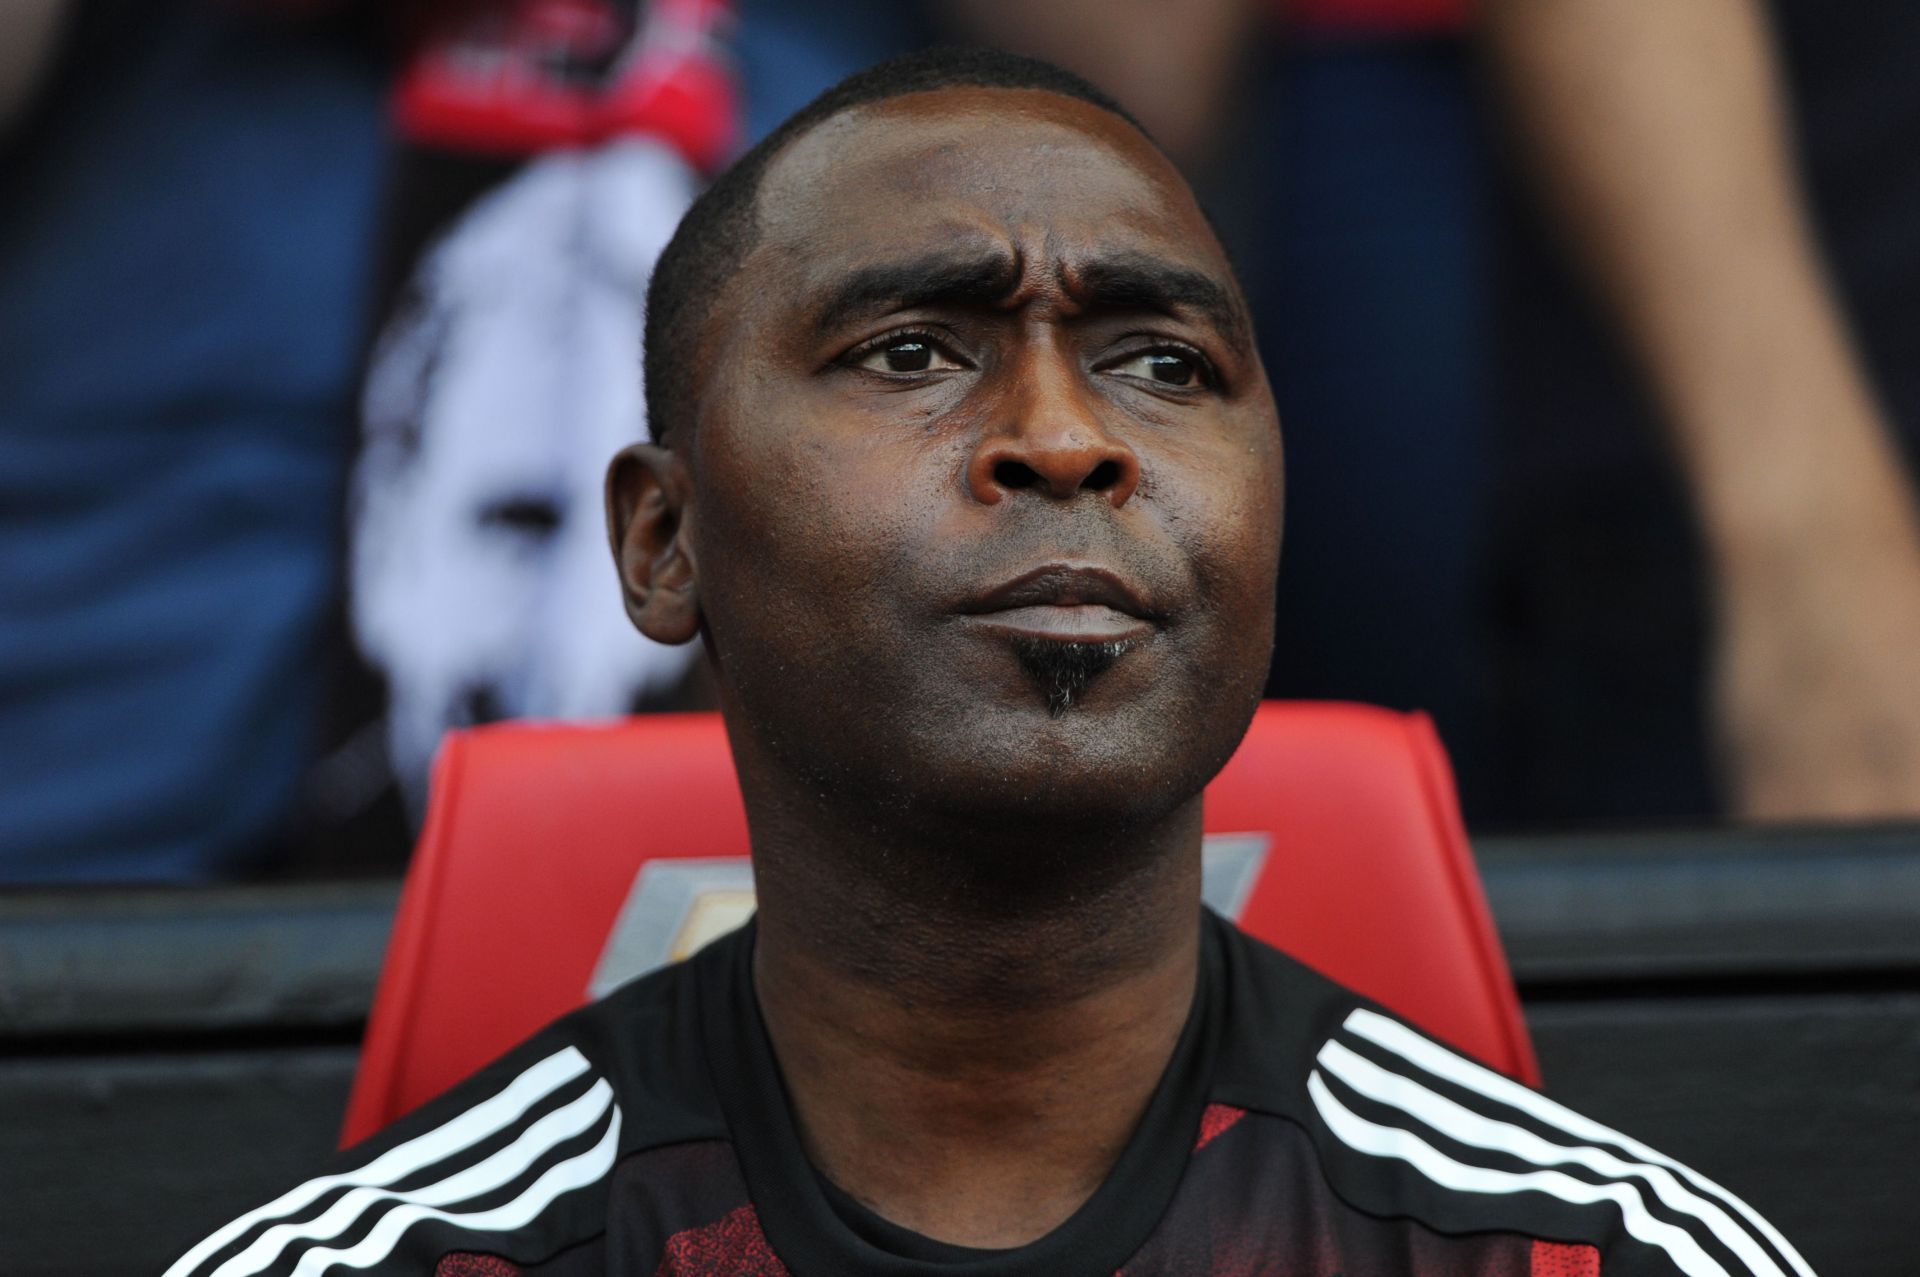 Andy Cole says records are set to be broken.